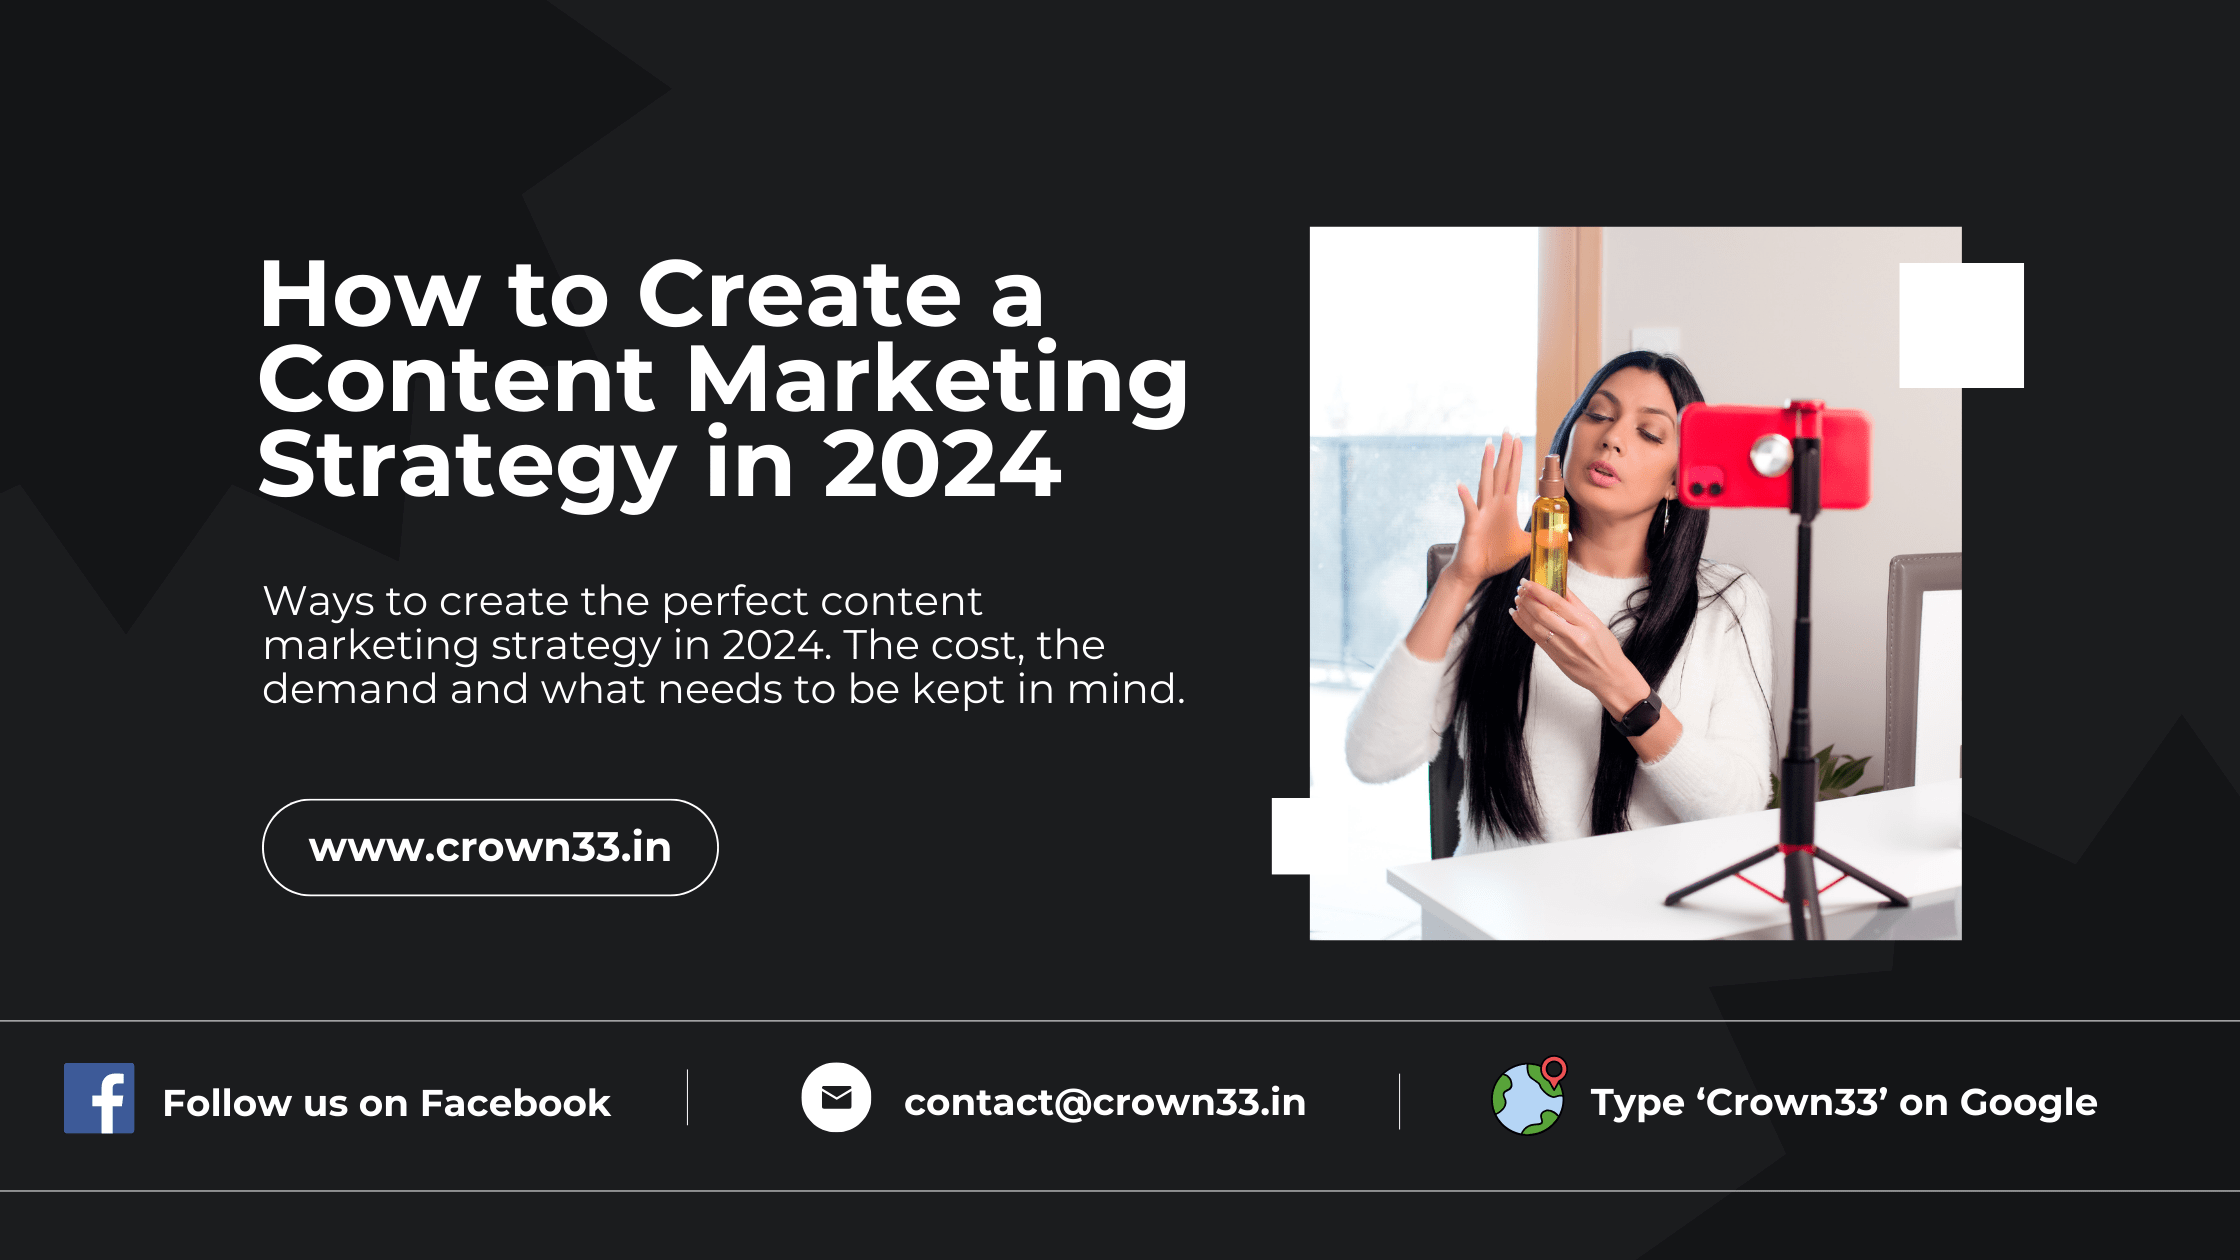 How to Create a Content Marketing Strategy in 2024